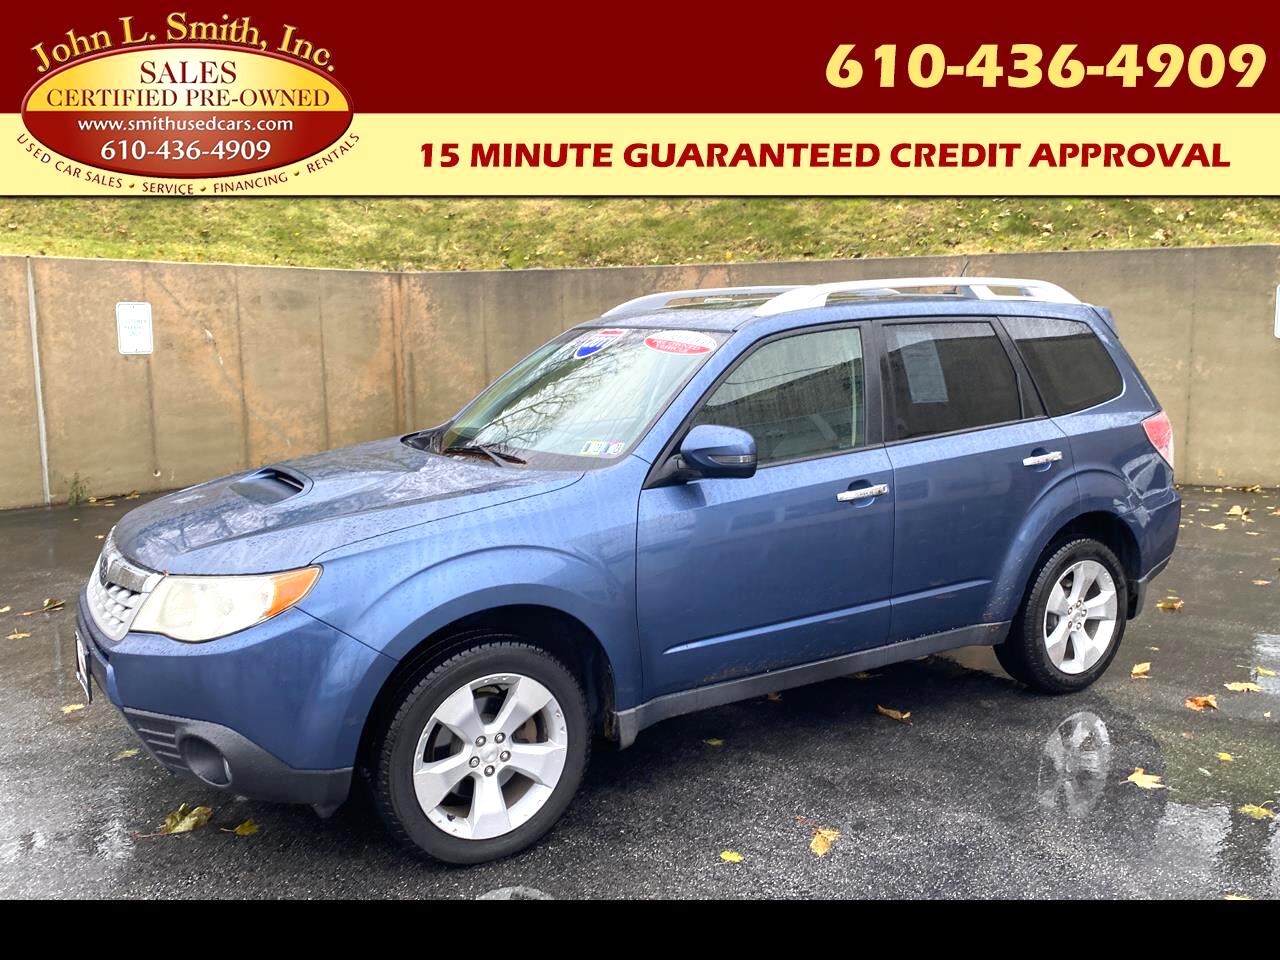 2011 Subaru Forester 2.5XT Limited